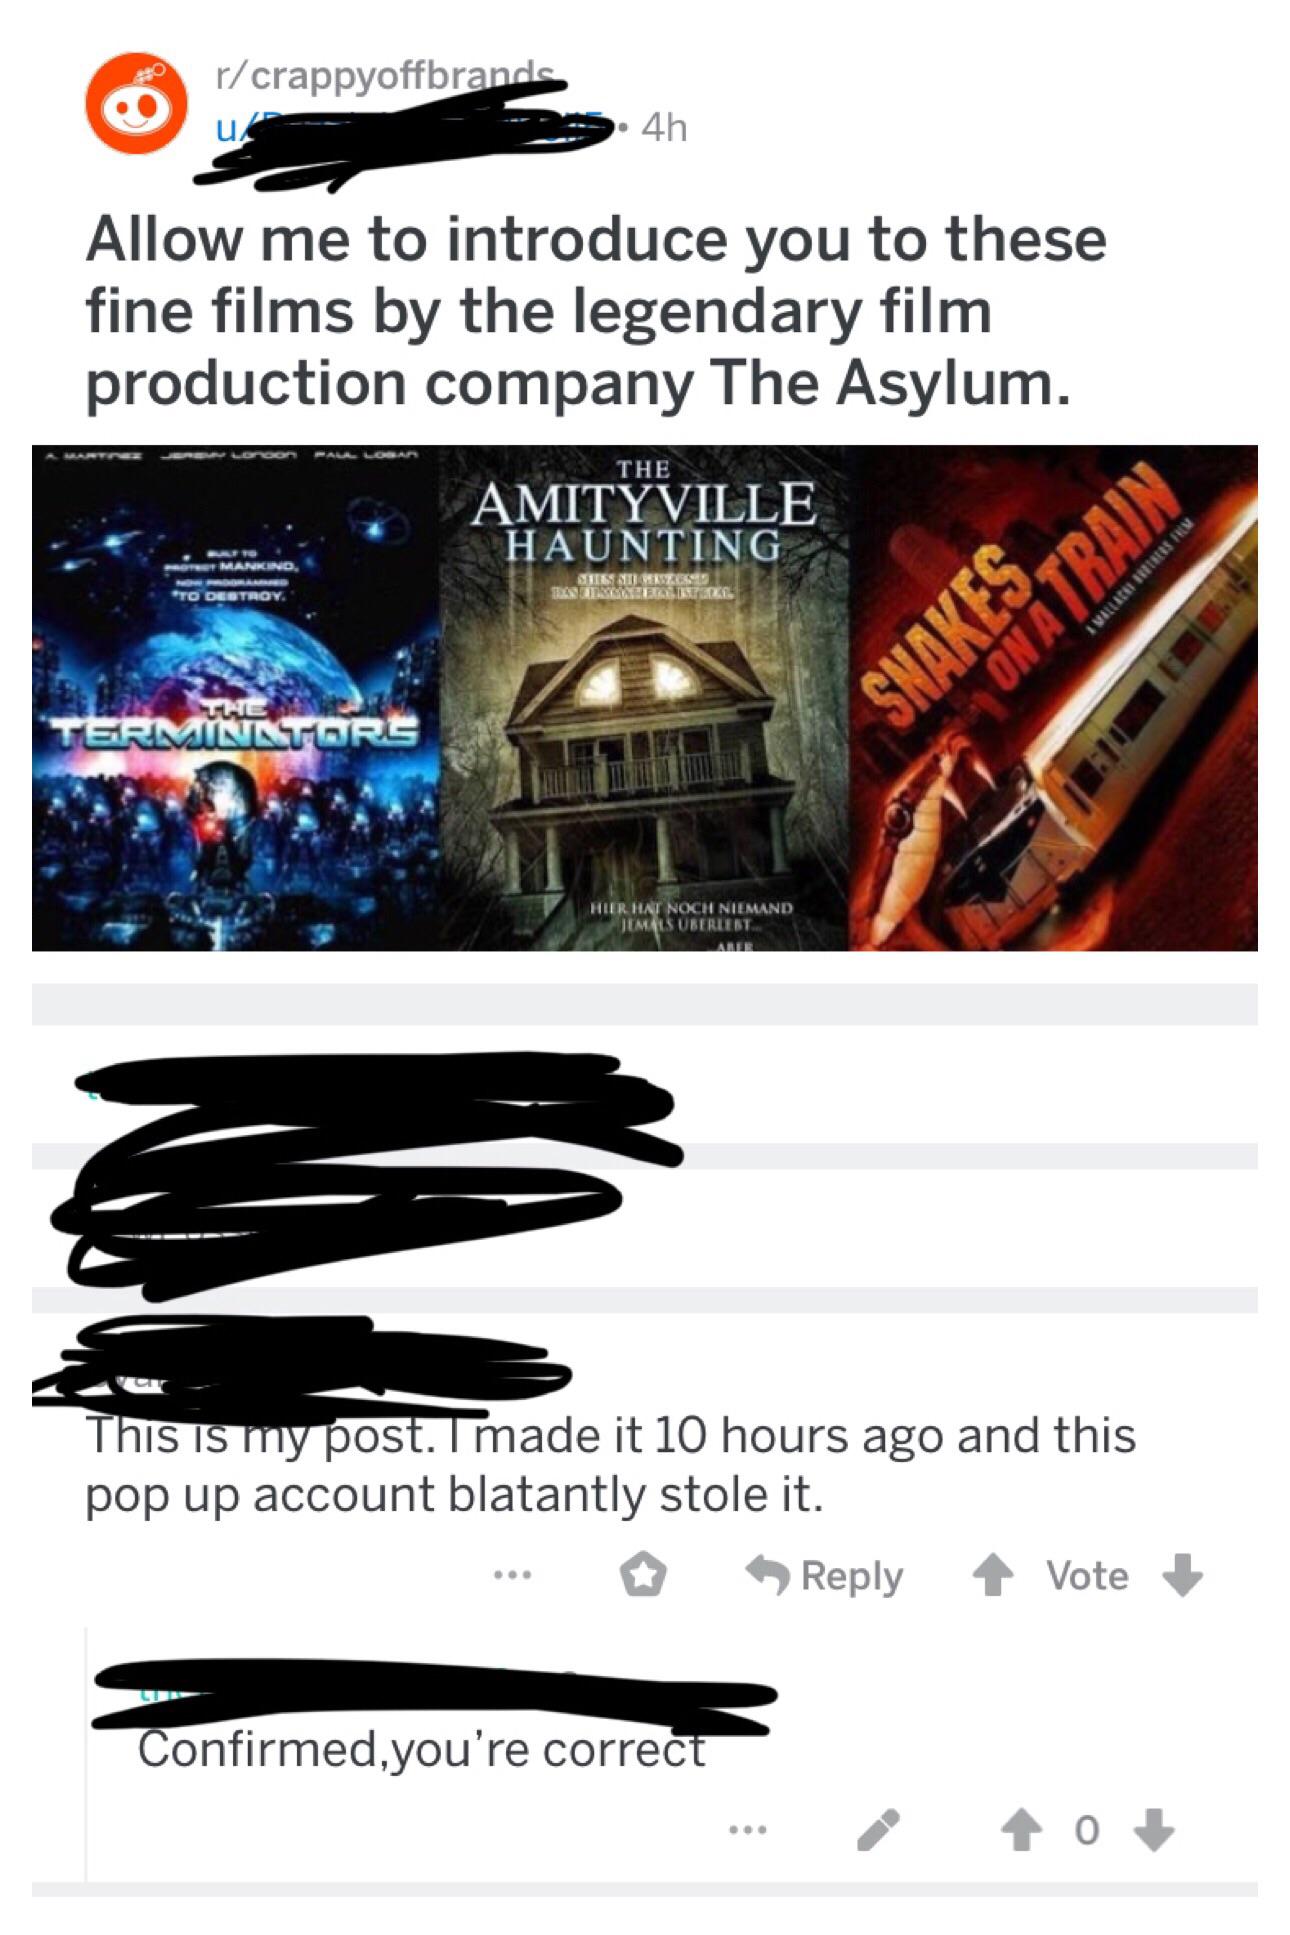 social media liars - Allow me to introduce you to these fine films by the legendary film production company The Asylum. The Amityville Haunting